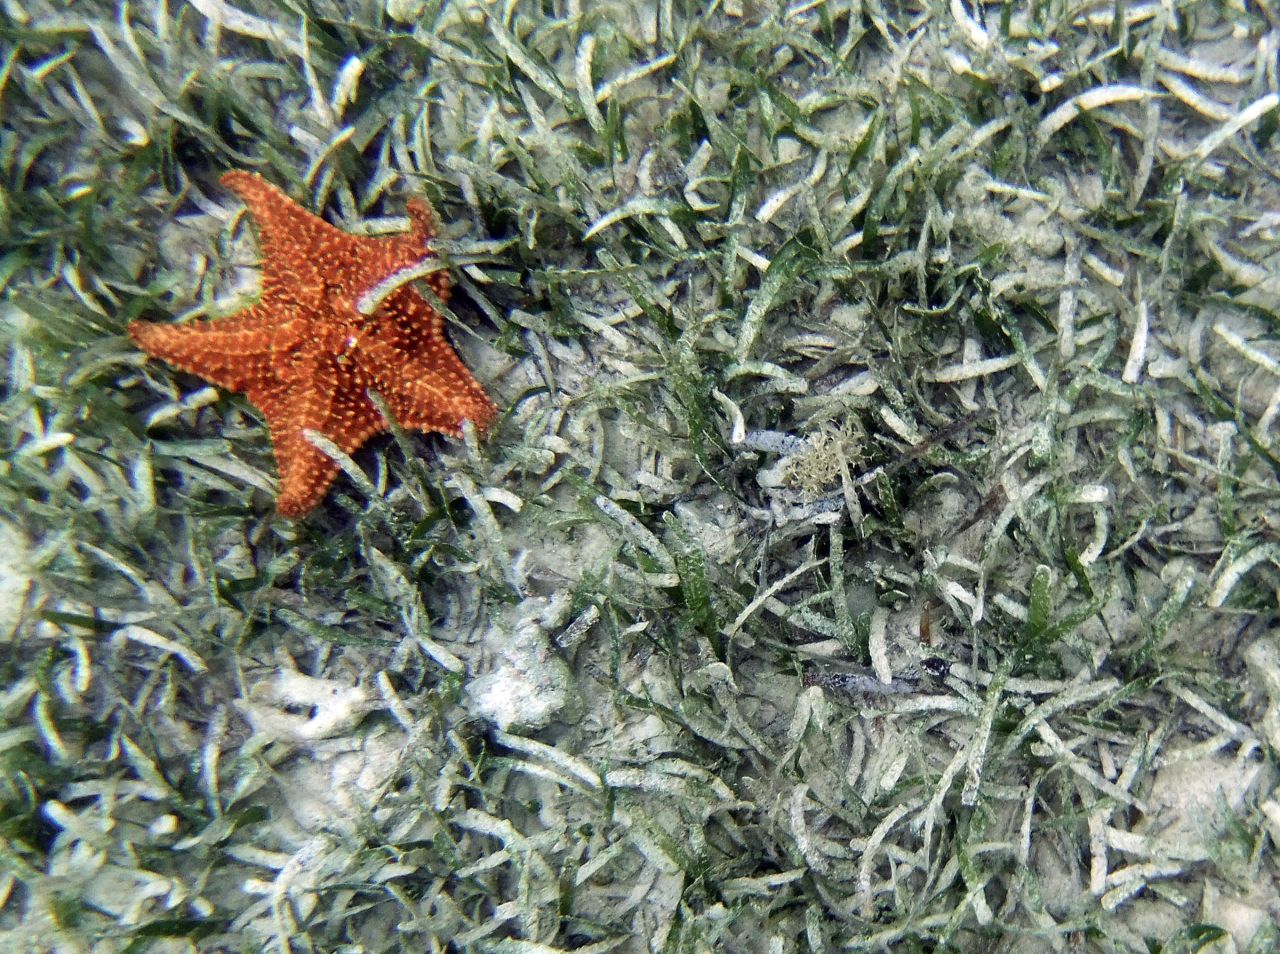 <a href="http://ireport.cnn.com/docs/DOC-1140899">Rich Muller</a> has been a photographer for more than 40 years, but this photo shoot was his first time experimenting underwater. He spied a starfish  on a small reef in Montego Bay, Jamaica.